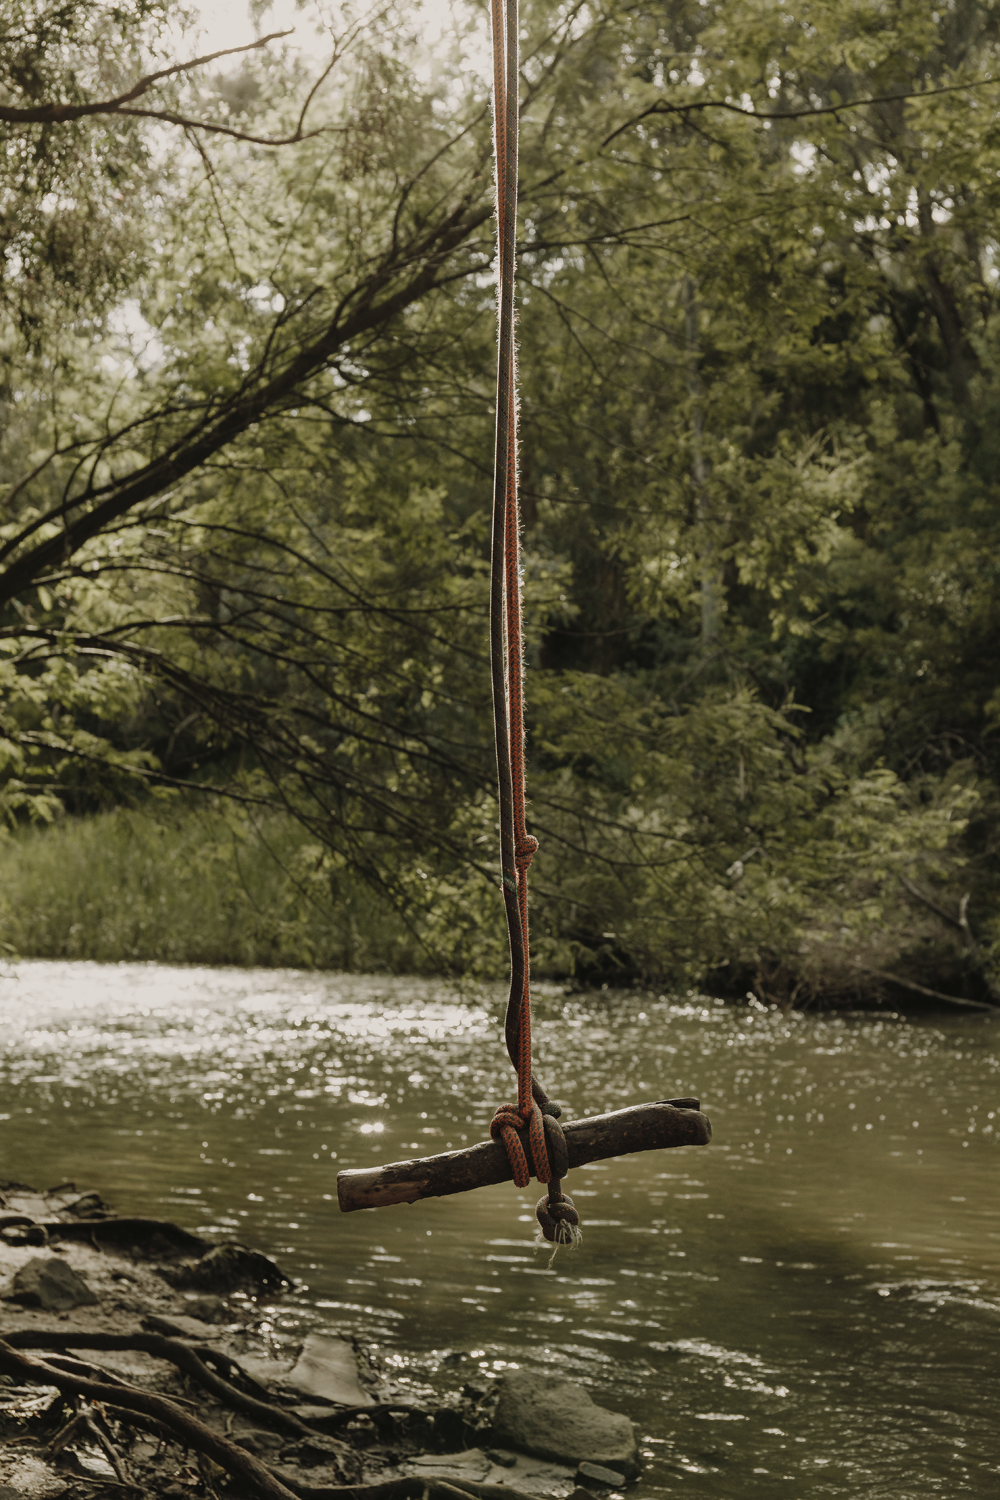 Colour photograph depicting a tree swing overlooking a creek landscape.